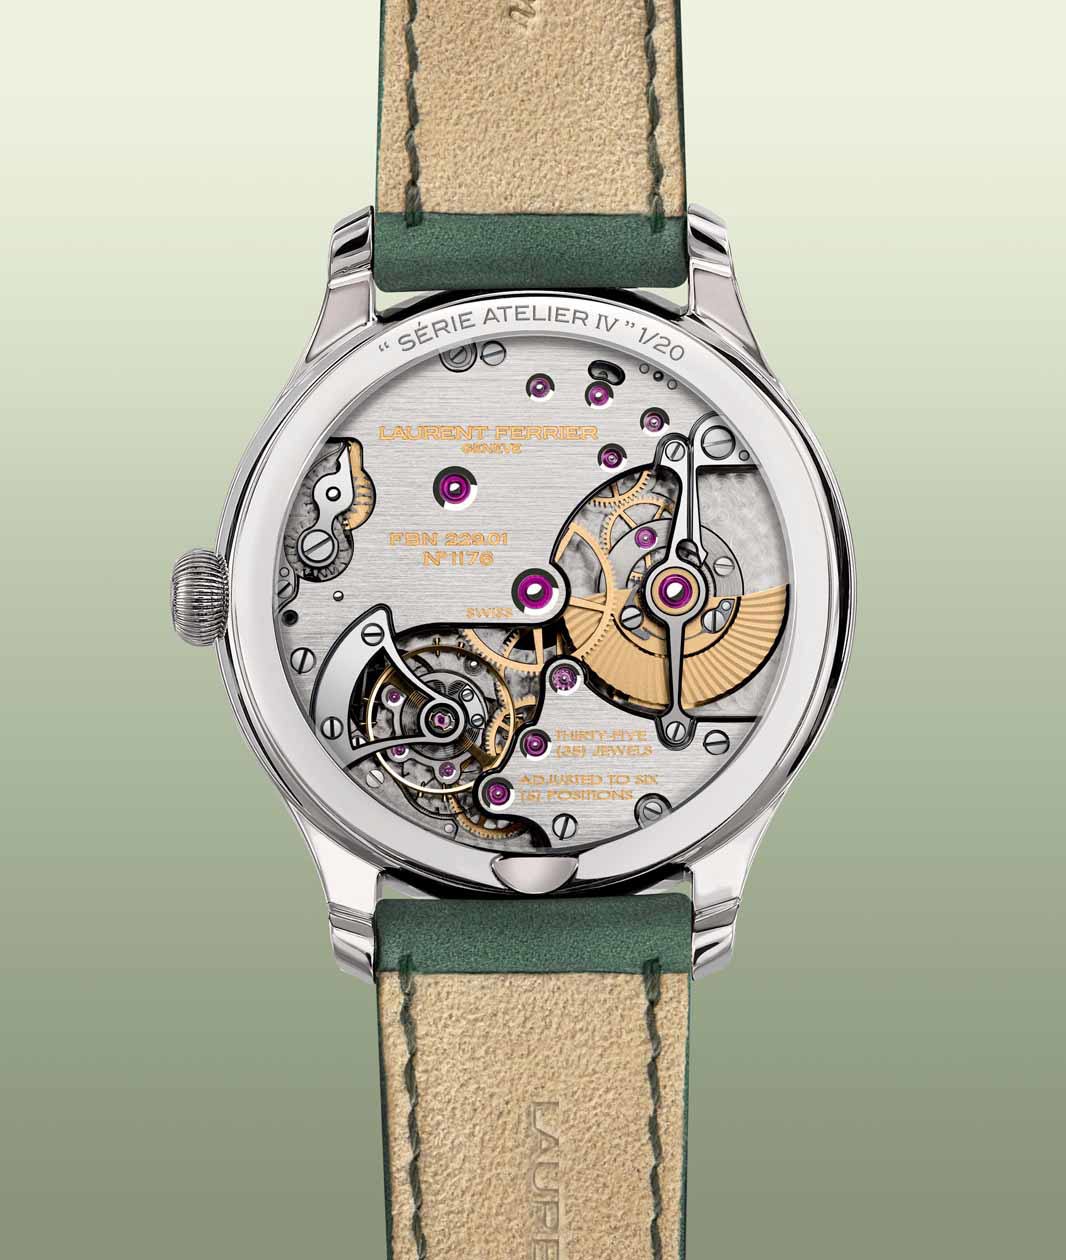  Classic Micro-Rotor “Série Atelier” Magnetic Green, Laurent Ferrier